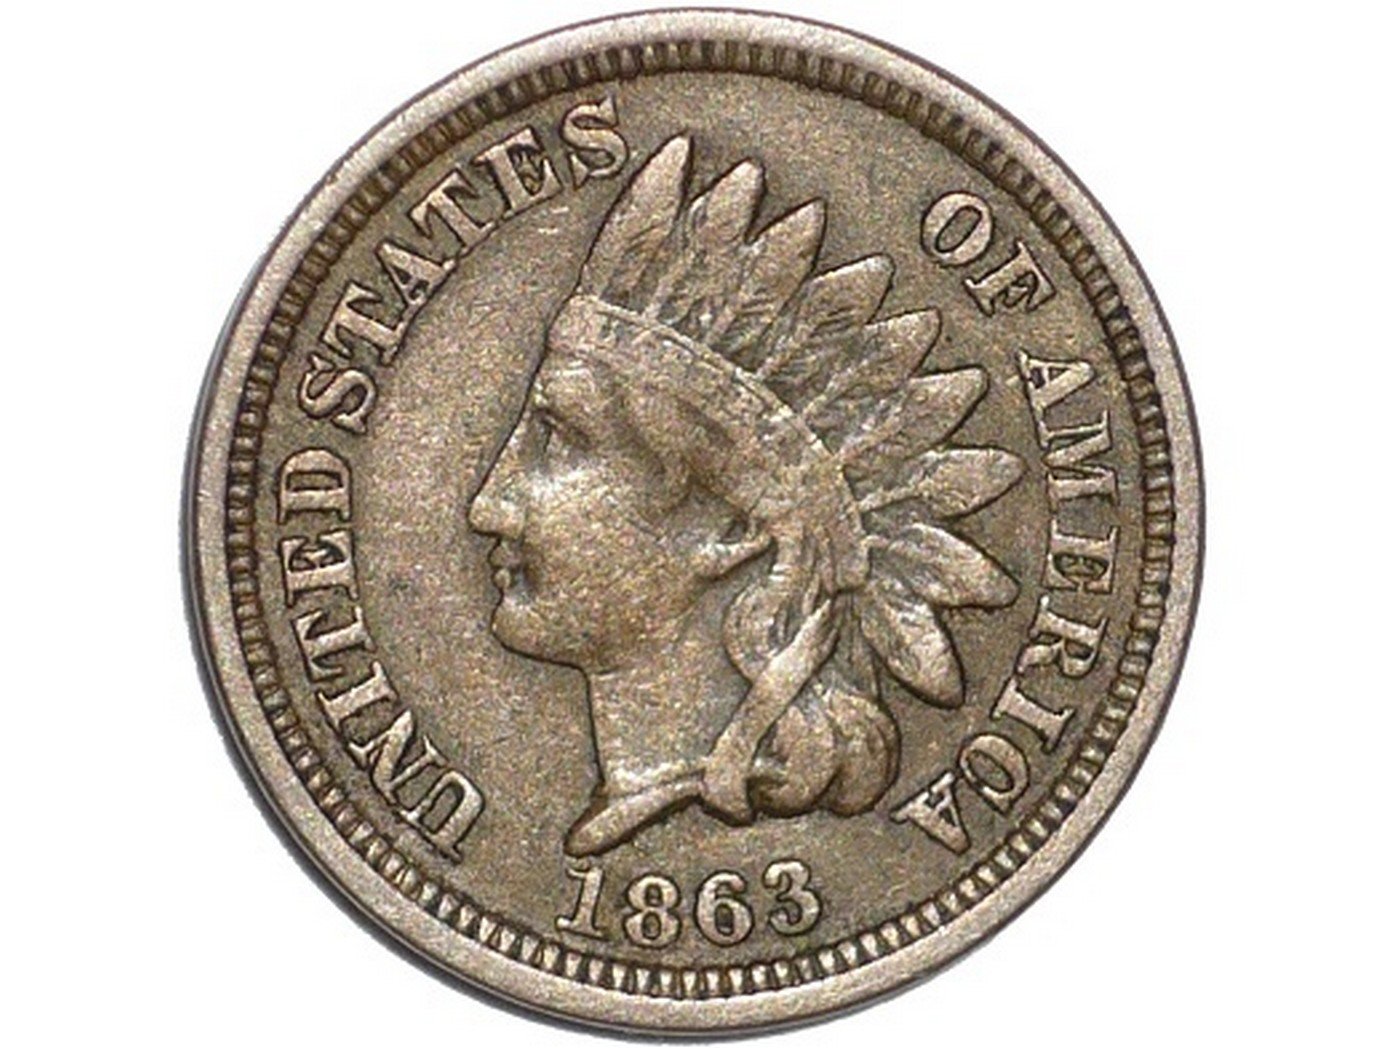 1863 Obverse of CUD-020 - Indian Head Penny - Photo by David Poliquin